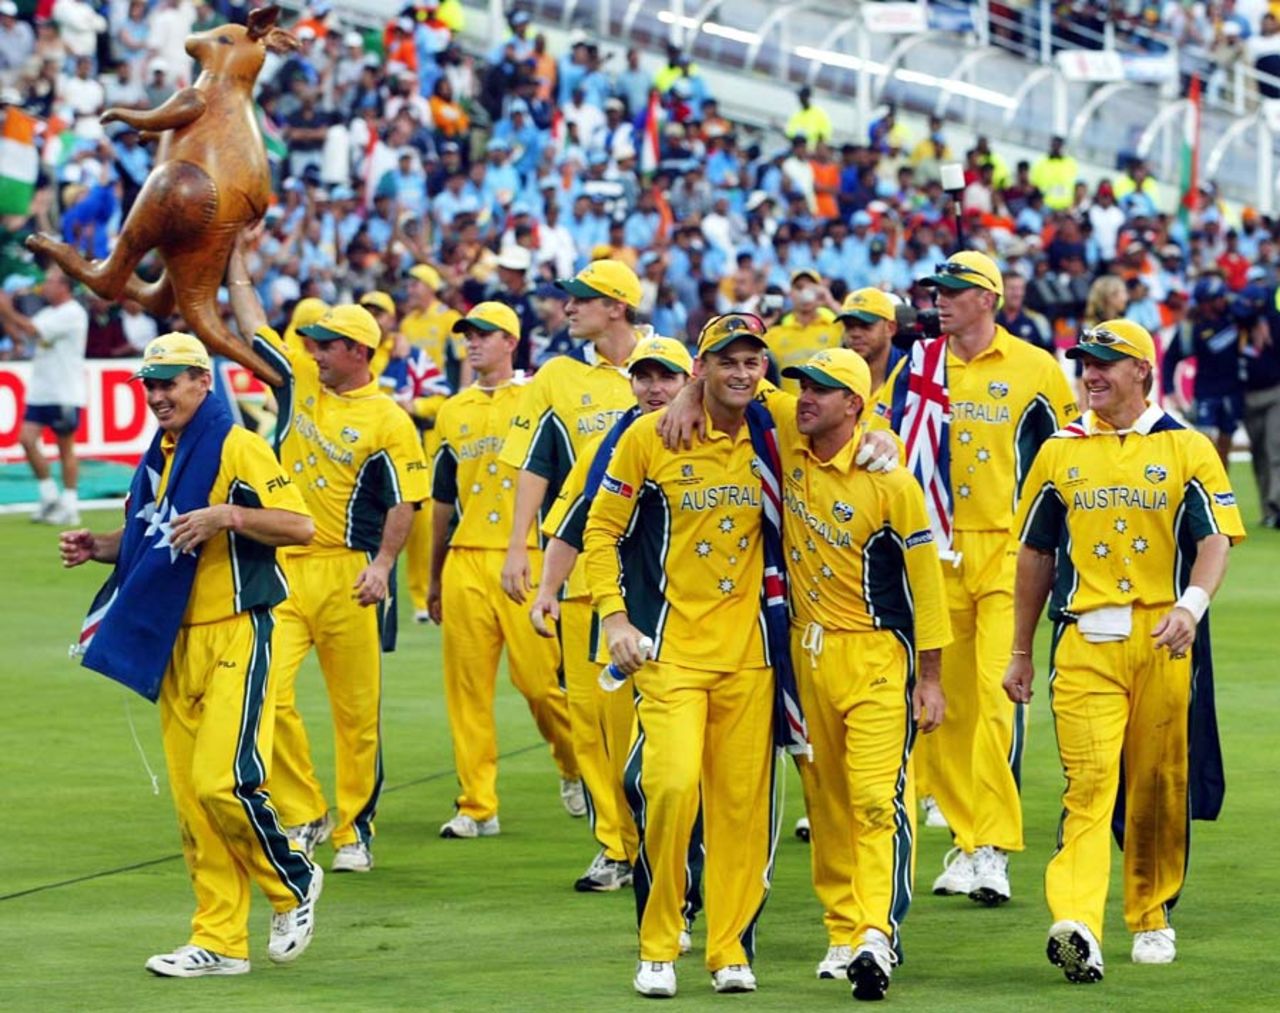 Australia do a lap of the ground after their World Cup win against India, March 23, 2003